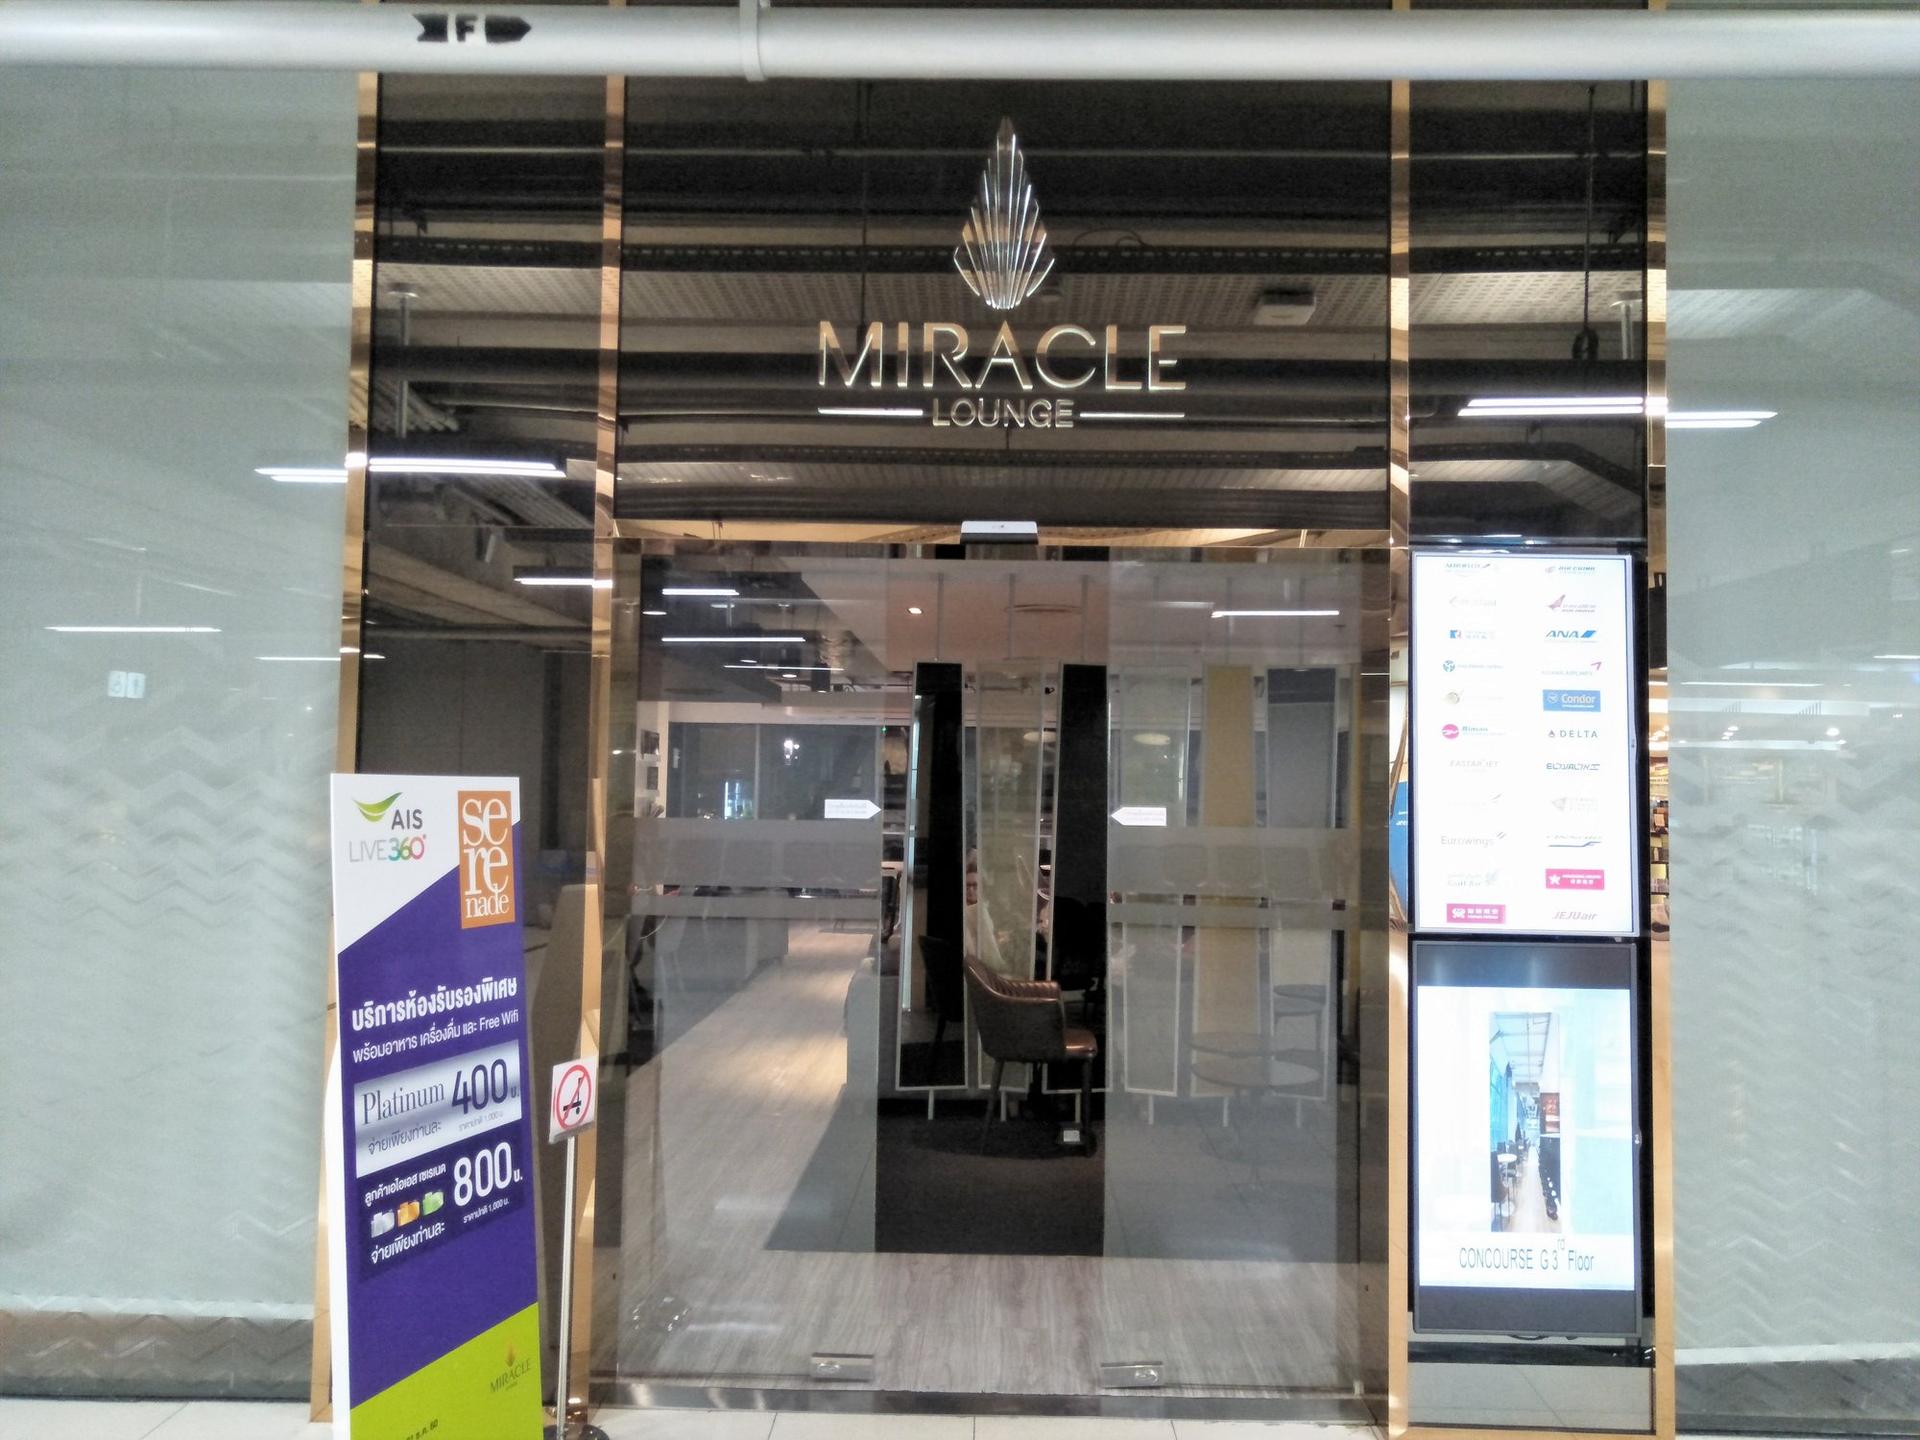 Miracle First Class Lounge image 28 of 34